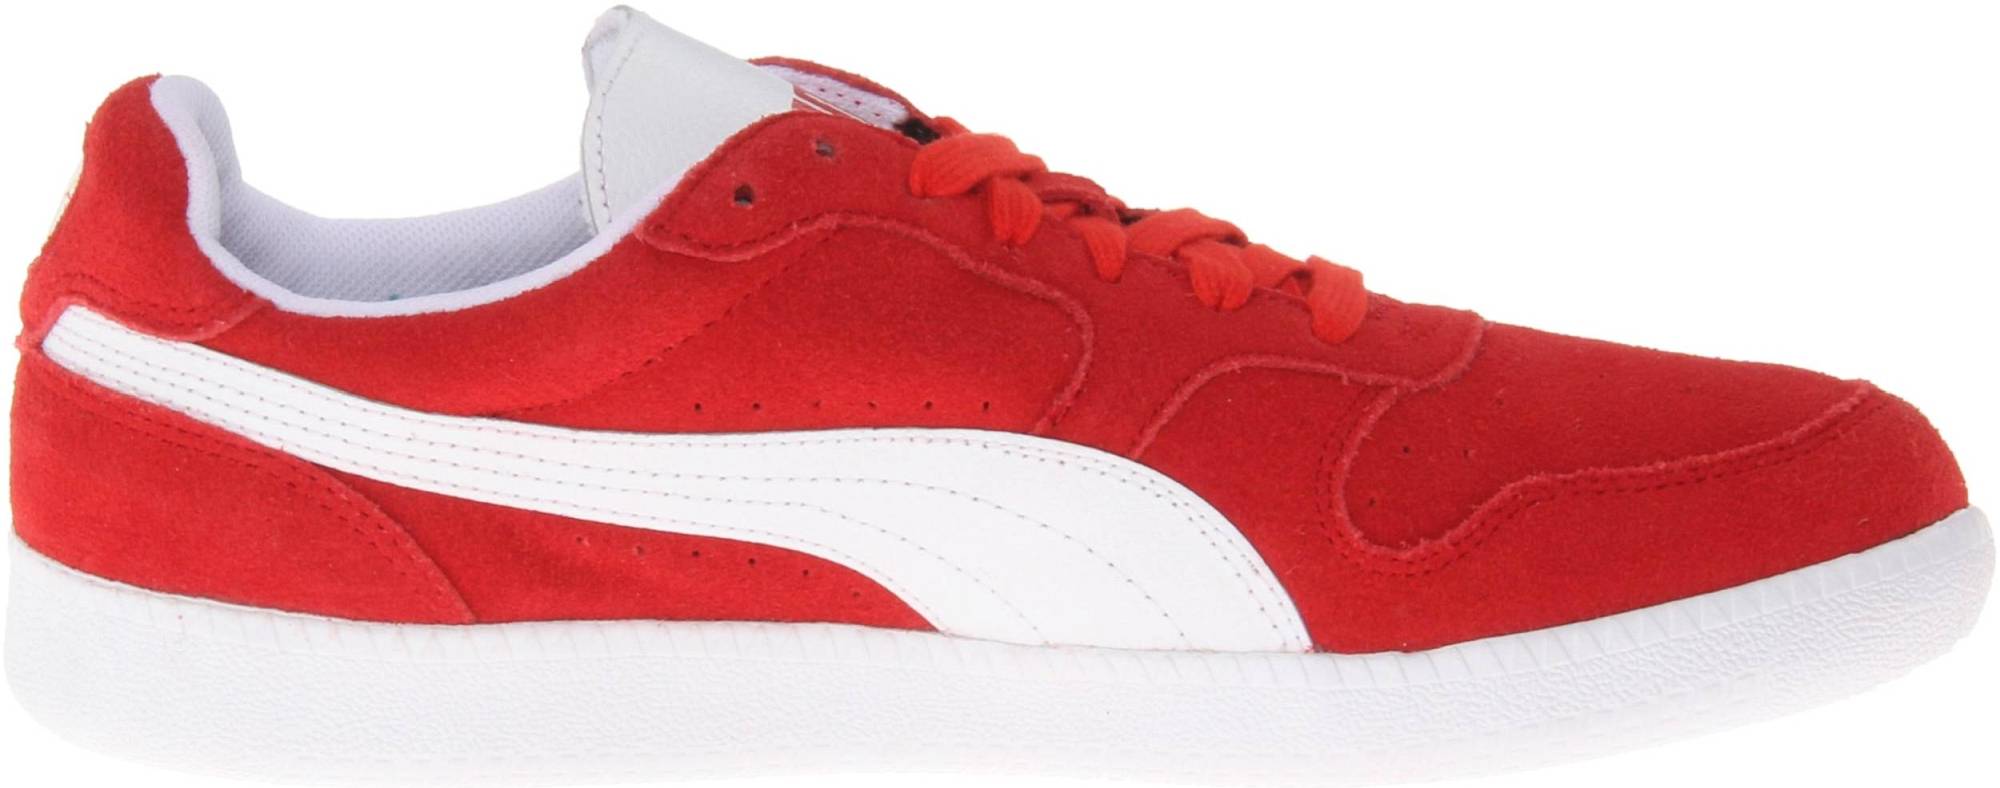 Puma Icra Trainer – Shoes Reviews & Reasons To Buy